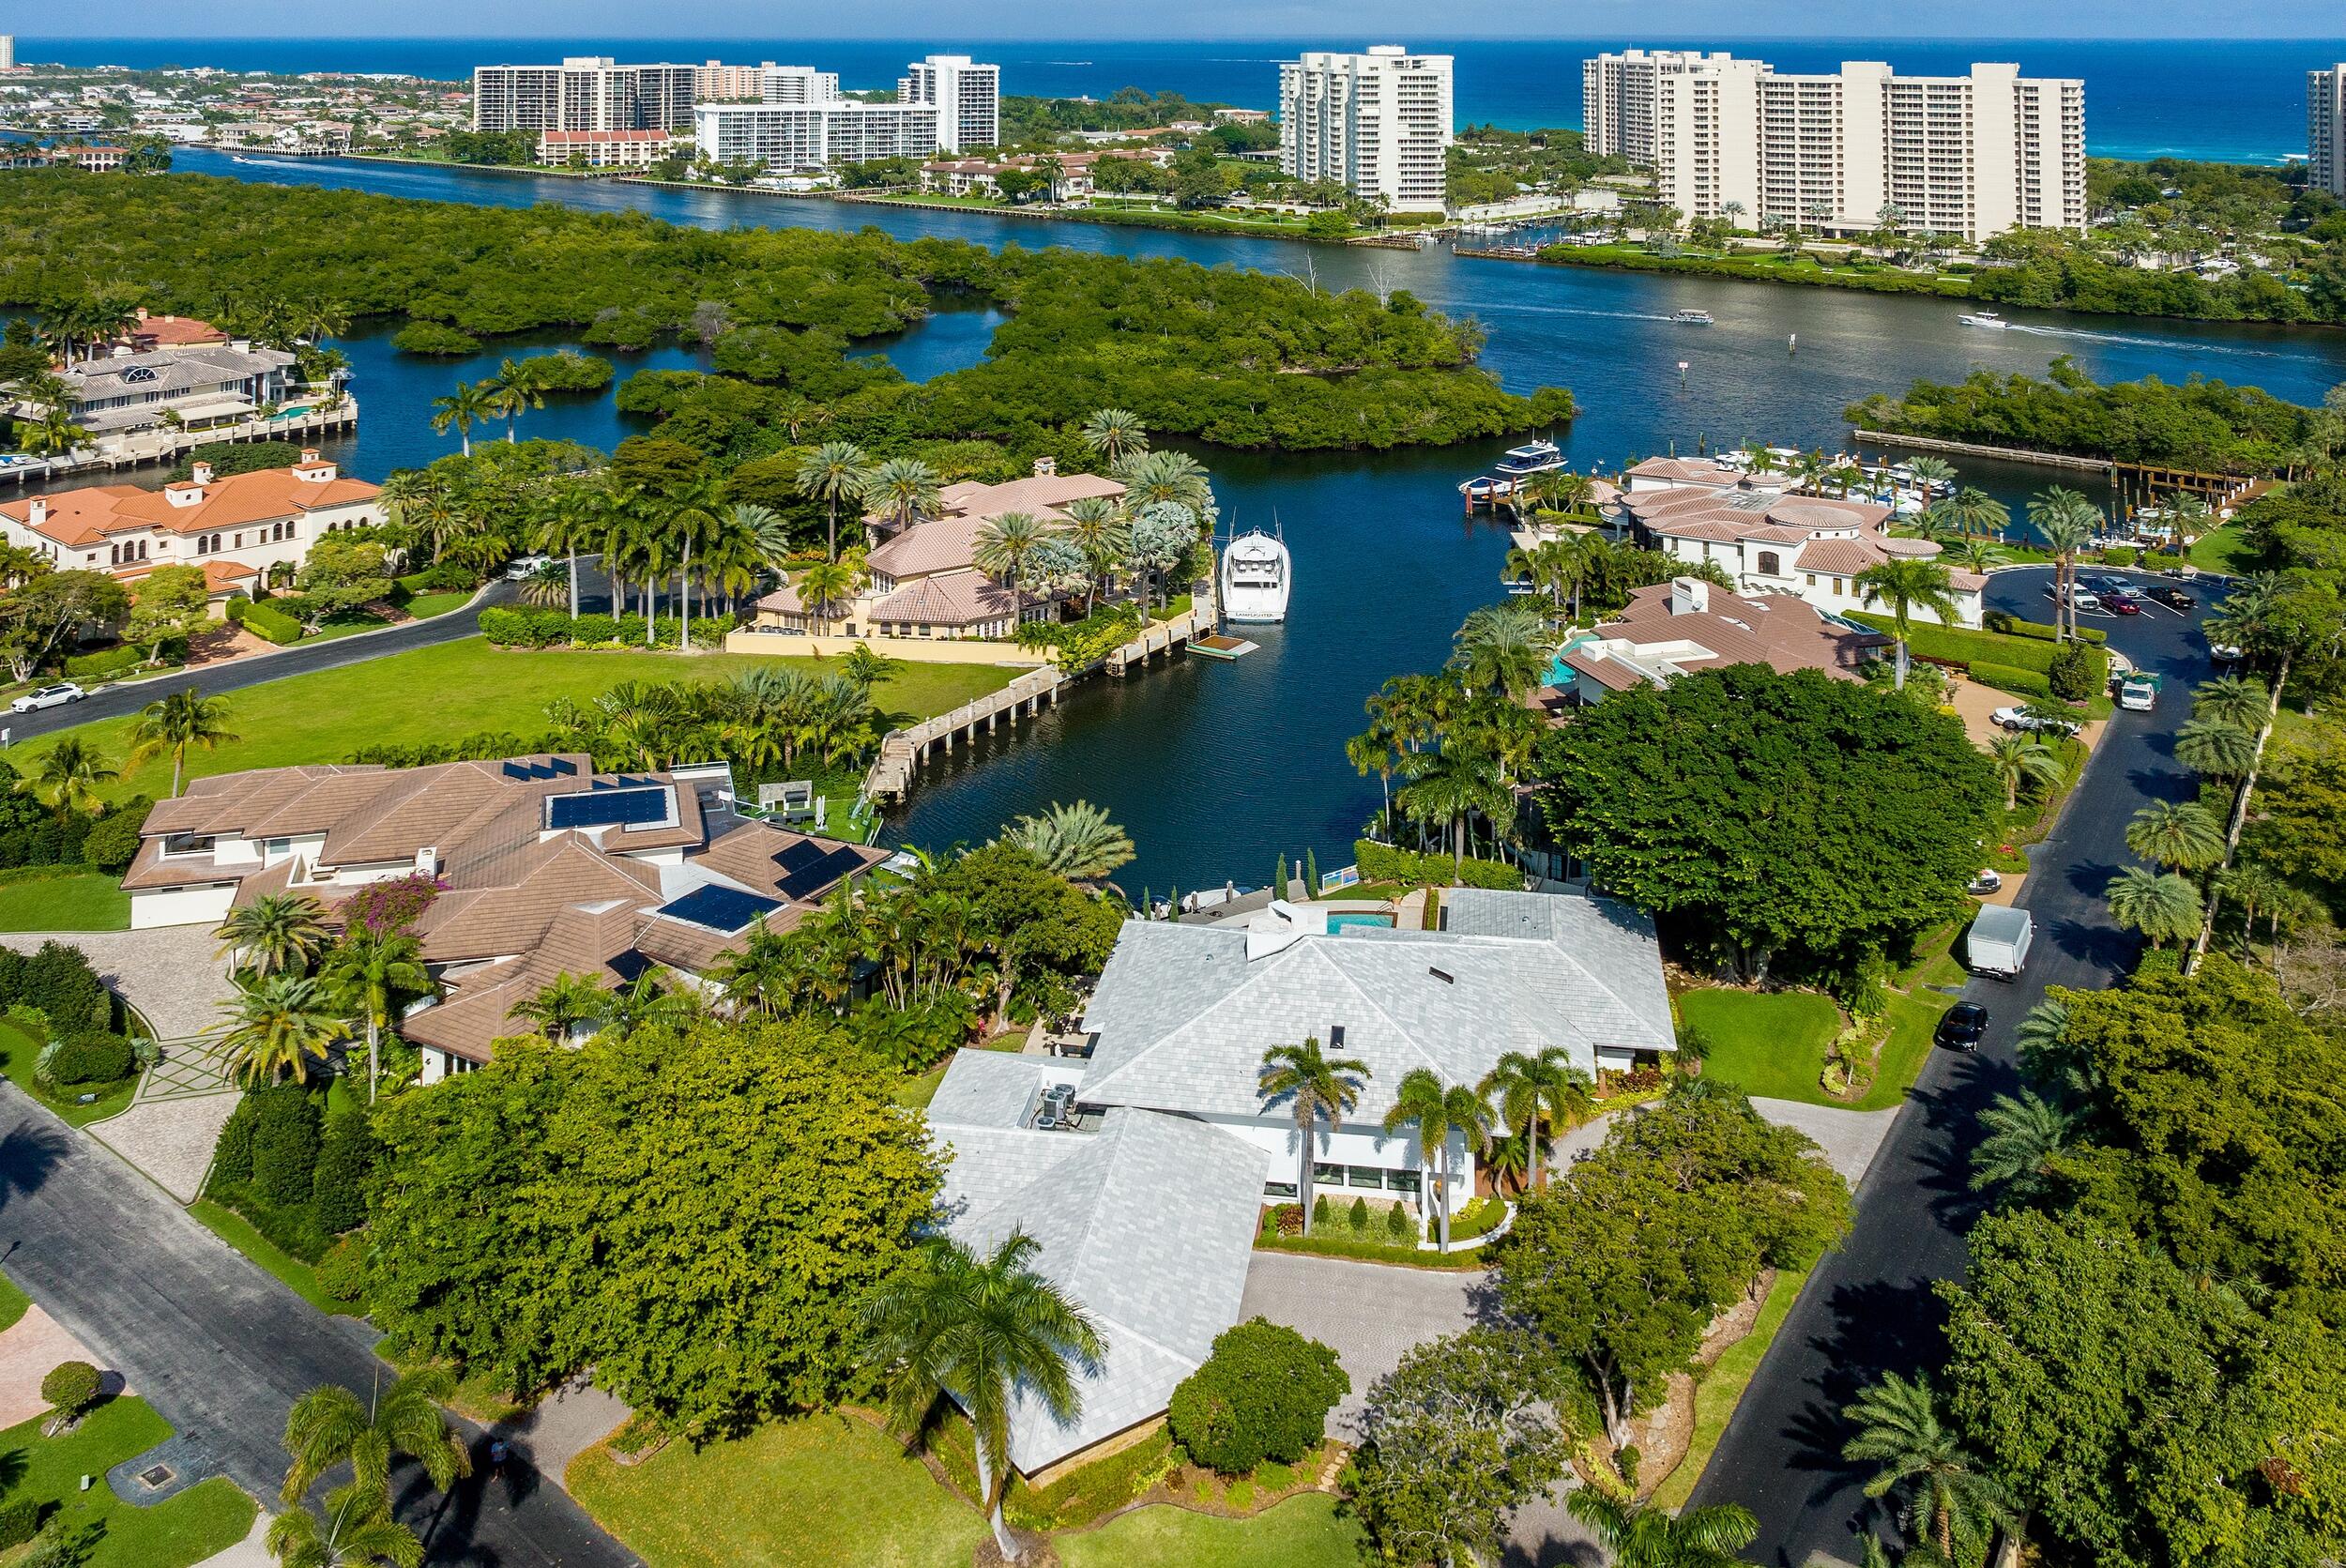 The ultra-exclusive community of The Sanctuary sets the picturesque backdrop for this contemporary waterfront stunner. Boasting over 11,000 total square feet, the architecture in this home dazzles, offering flow through entertaining spaces both indoor and out. The great room draws you in with epic floor to ceiling windows that showcase a long view of the wide canal leading to the intracoastal. Keep your boat at your private dock or in the adjacent 23 slip marina and quickly access the ocean with ease and no fixed bridges. The manned 24-hour guard gate along with 24/7 roving security by both land and water offer the utmost safety and security for you and your family in this 90-residence oasis. Minutes from world-class dining, premium shopping and the Boca Raton airport, this home will surely delight the most discerning buyer. Stay and play within the community at the newly appointed Har-Tru tennis courts, playground and basketball court, or enjoy the half mile walk or bike ride to the idyllic beach. Come see why Forbes rated this community among the top 10 most exclusive in the country - your South Florida dream lifestyle awaits. 

DISCLAIMER: Information published or otherwise provided by the listing company and its representatives including but not limited to prices, measurements, square footages, lot sizes, calculations, statistics, and videos are deemed reliable but are not guaranteed and are subject to errors, omissions or changes without notice. All such information should be independently verified by any prospective purchaser or seller. Parties should perform their own due diligence to verify such information prior to a sale or listing.